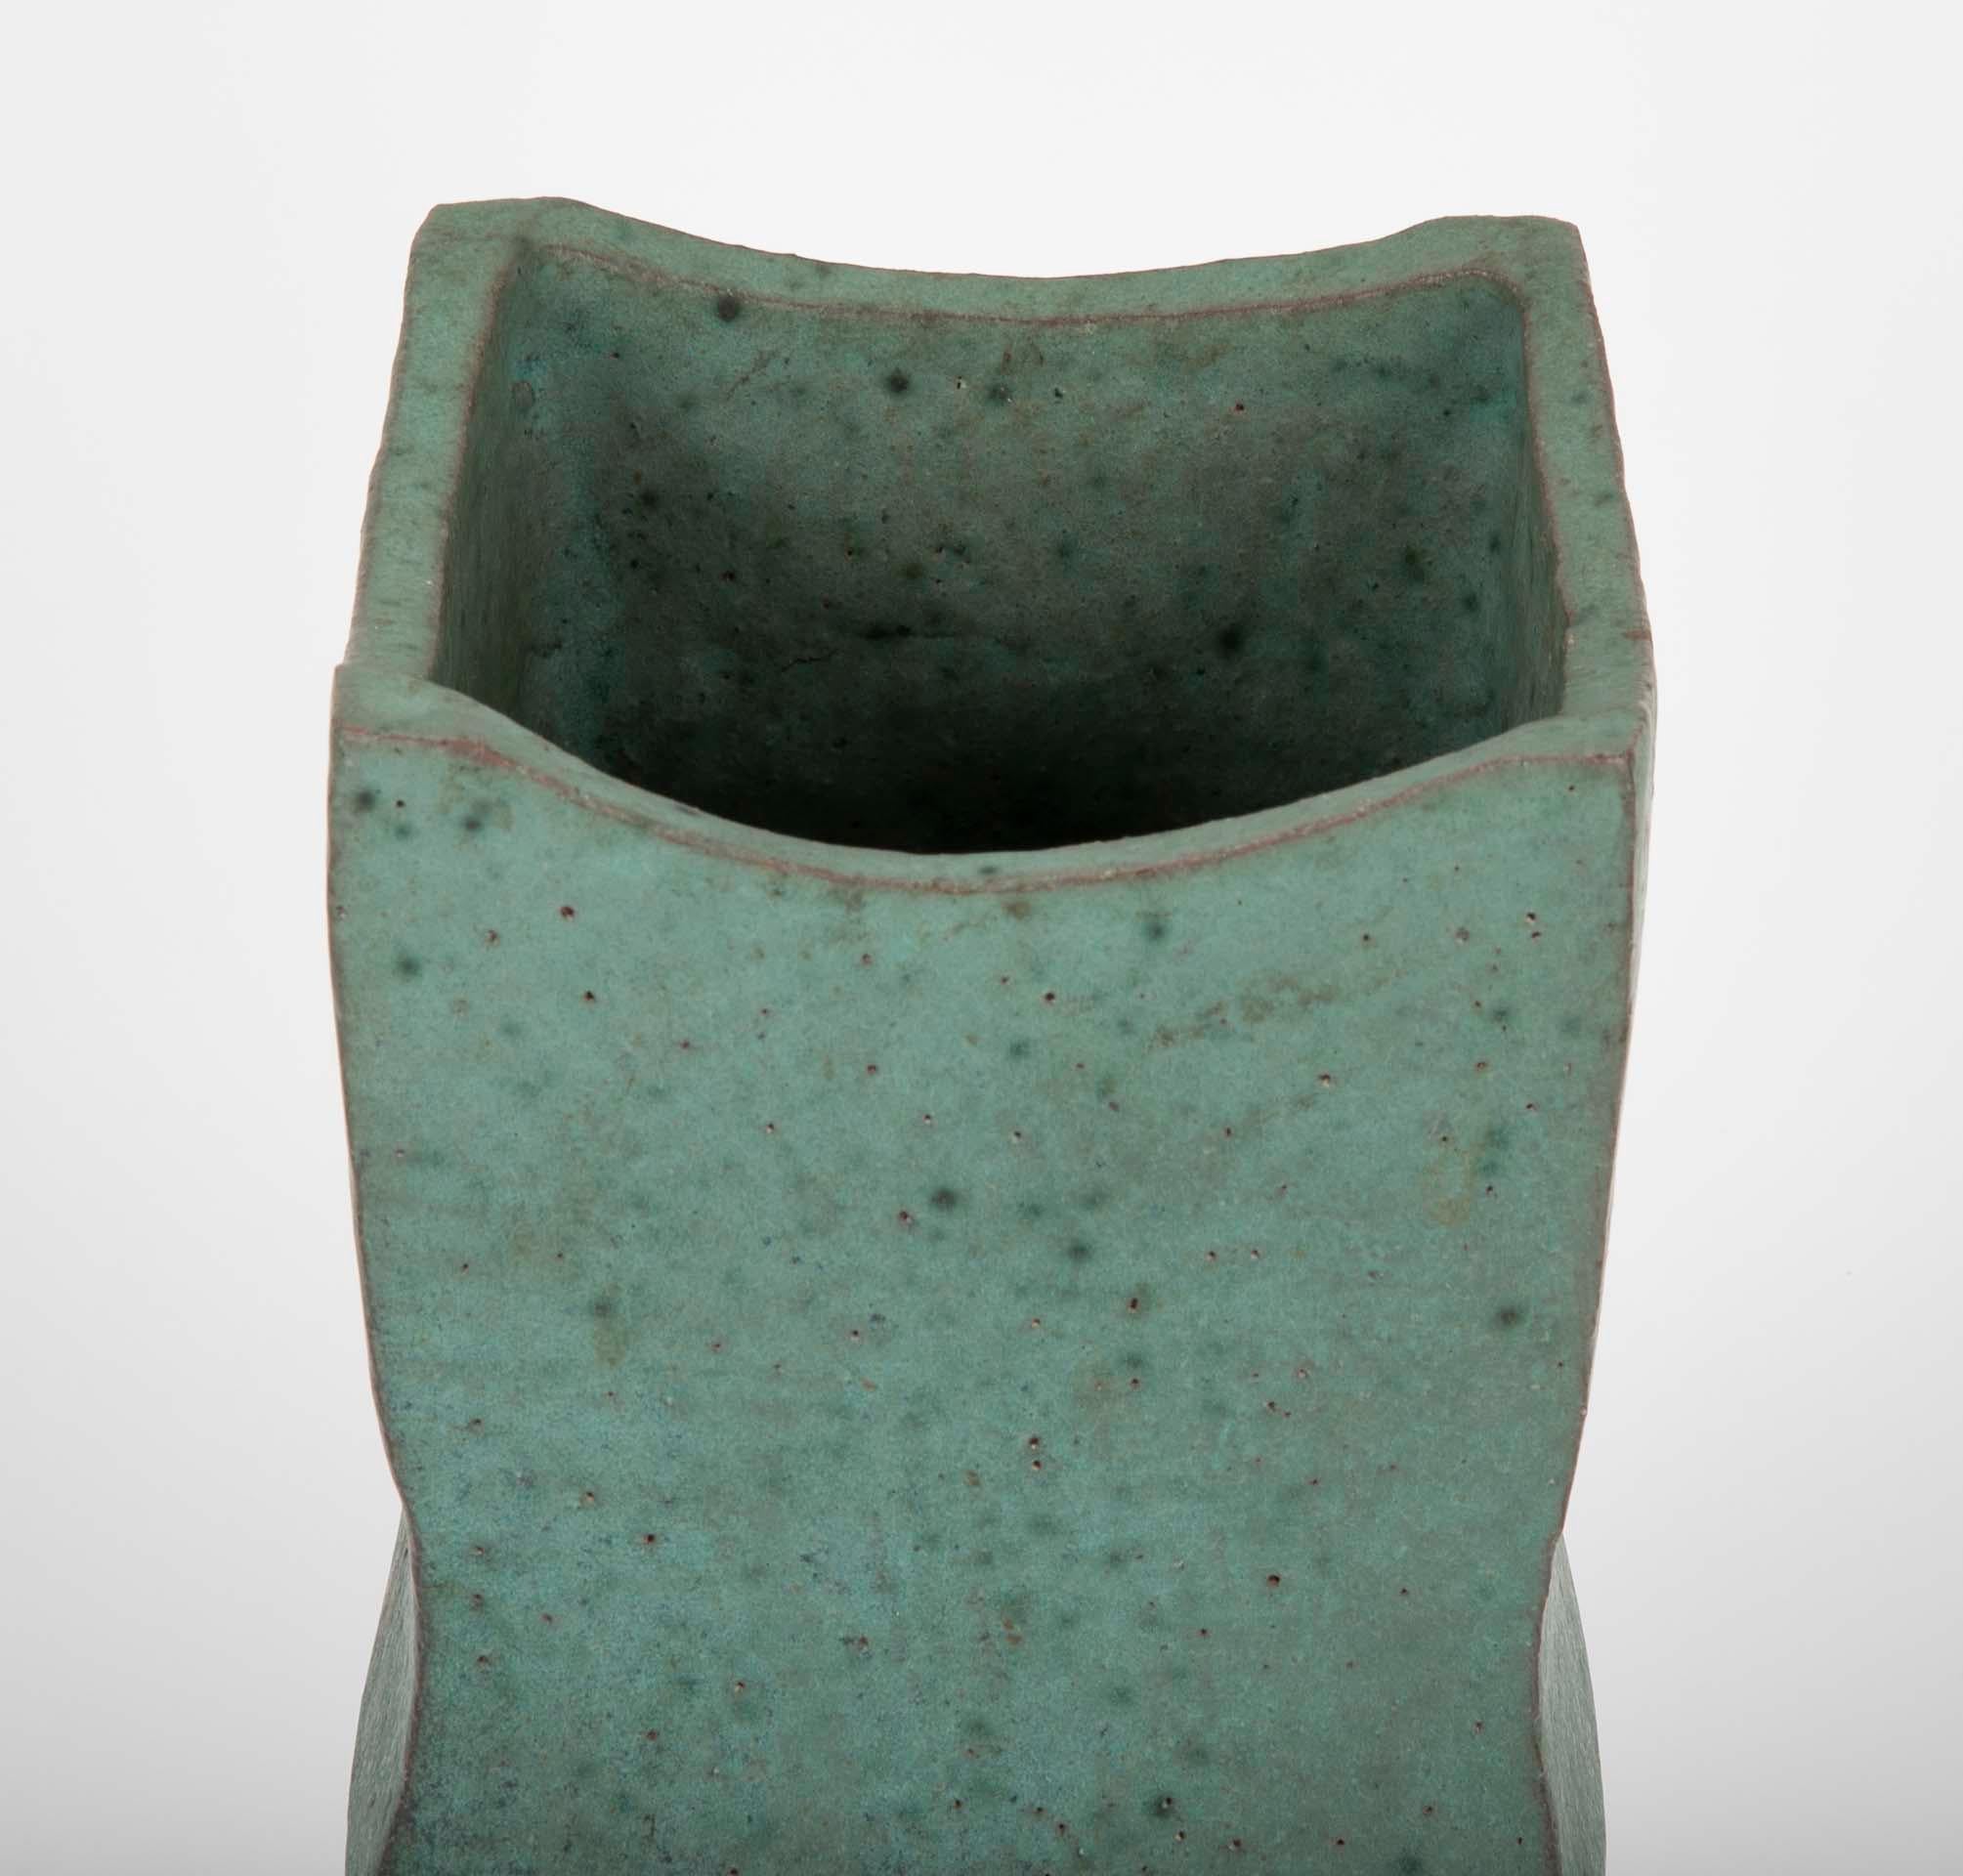 A beautifully conceived, thoroughly modern Japanese ceramic vase with wonderful muted turquoise glaze. The geometric upper portion above a round tapered unglazed base. An unusual and very compelling design. Marked on base.